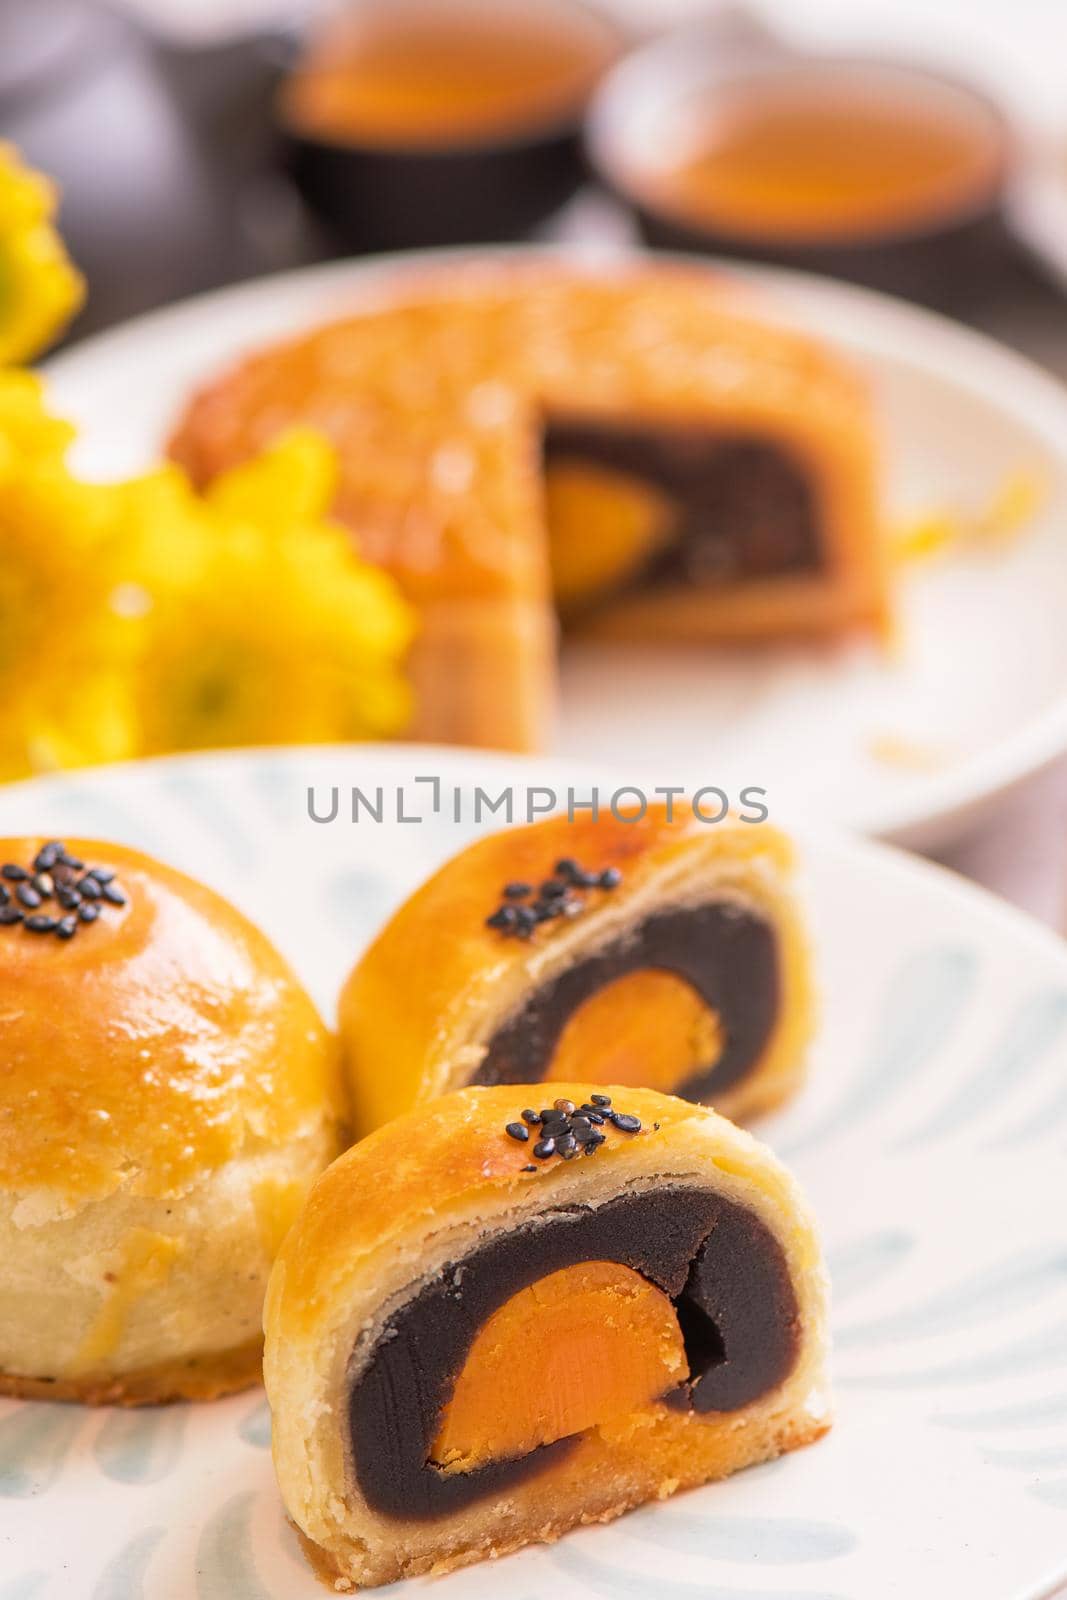 Mid-Autumn Festival traditional food concept - Beautiful cut moon cake on blue pattern plate on white background with flower, close up, copy space